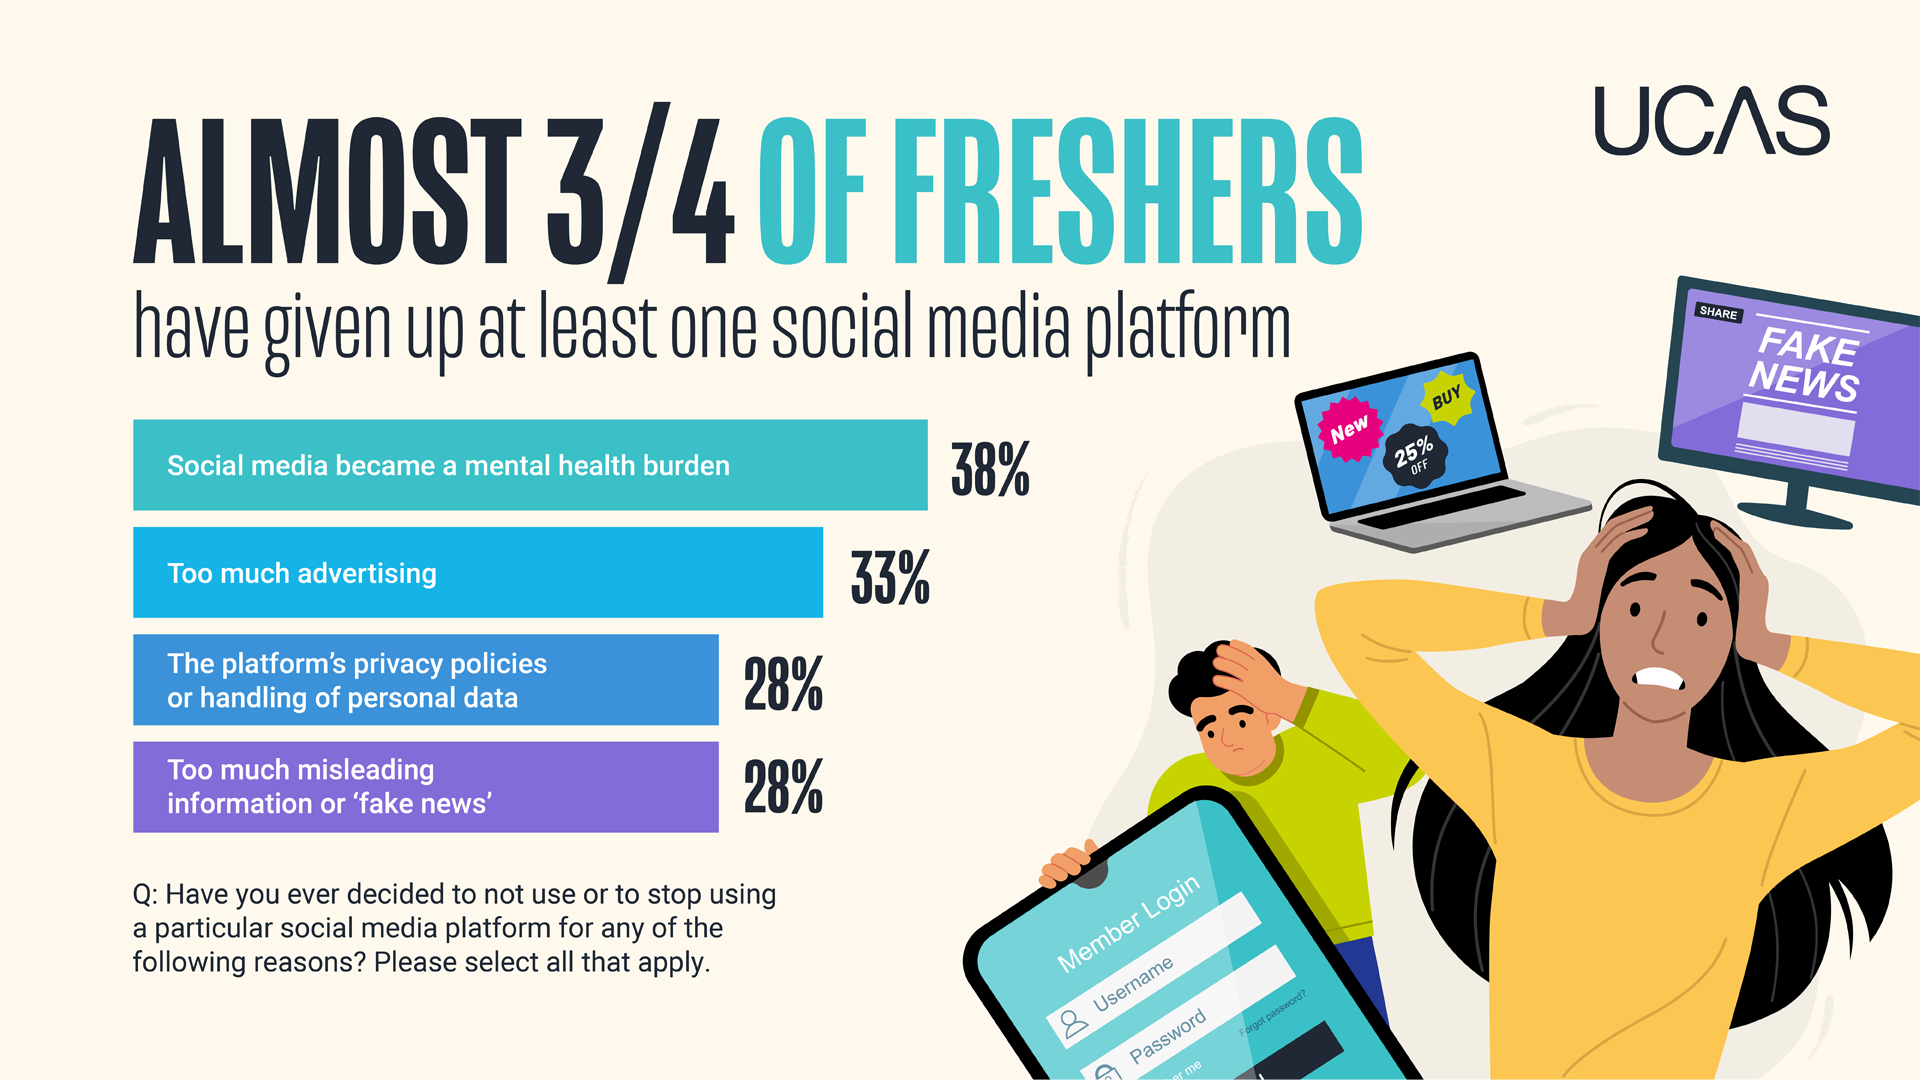 Graphic showing social media platforms given up by freshers